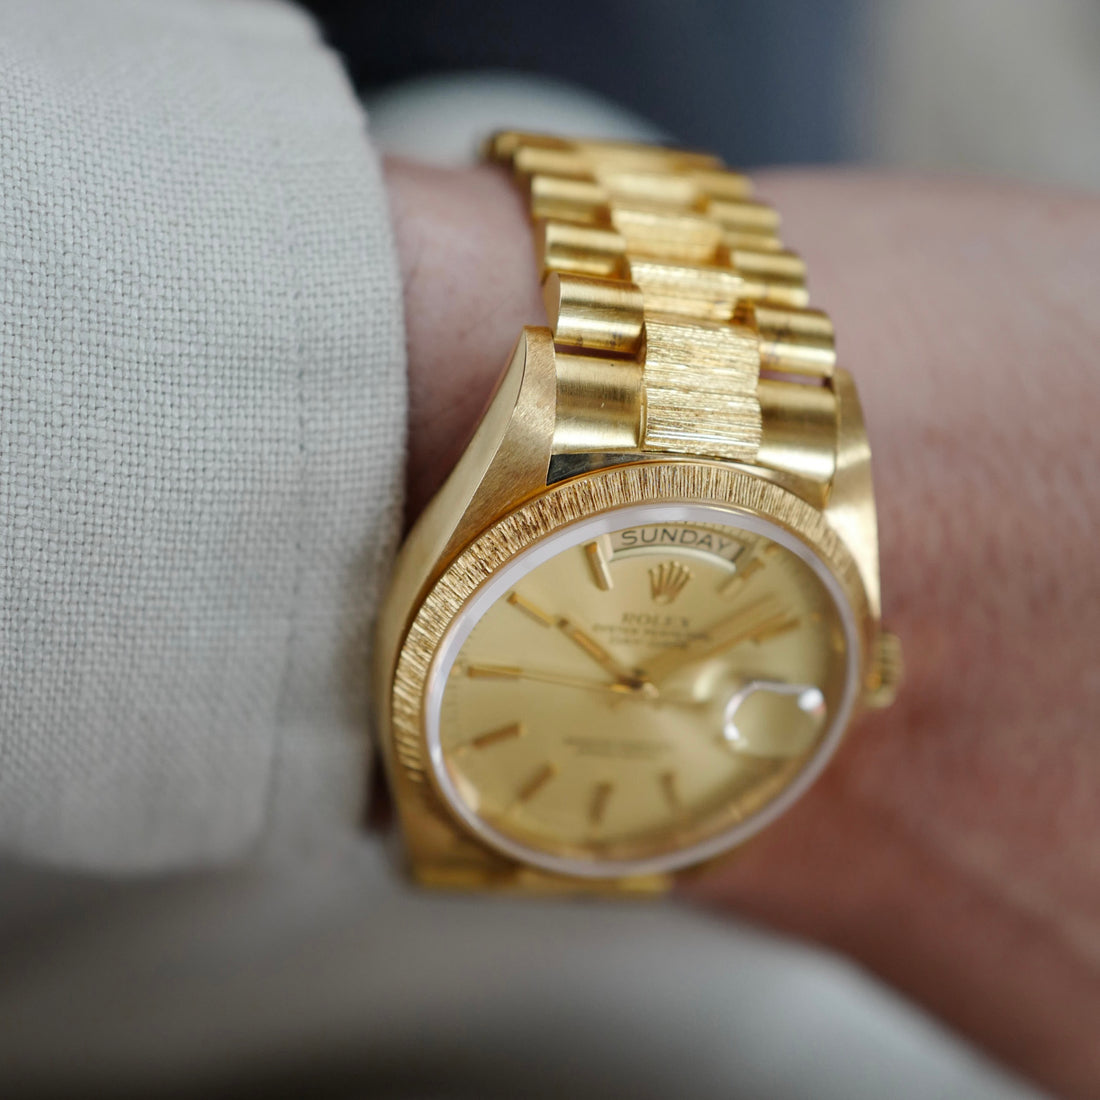 Rolex Yellow Gold Day-Date Ref. 18078 in Outstanding Condition with Original Bark Finish